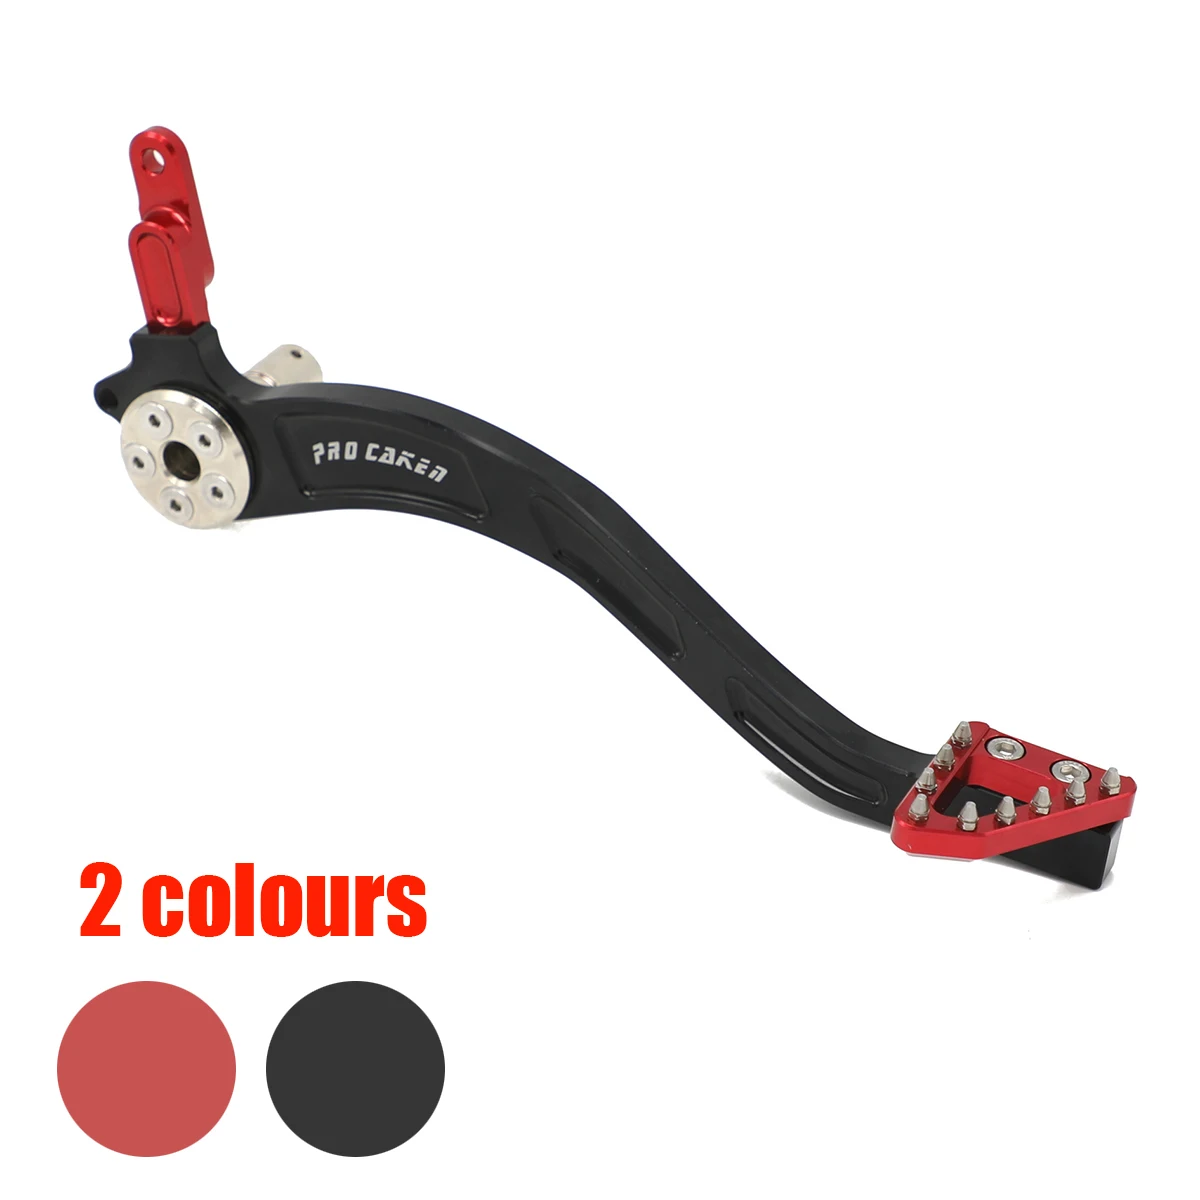 

CNC Aluminum Motorcycles Rear Gear Brake Pedal Lever For Honda CRF230F CRF 230 F CRF230 2003 2004 2005 2006 2007 2008 2009